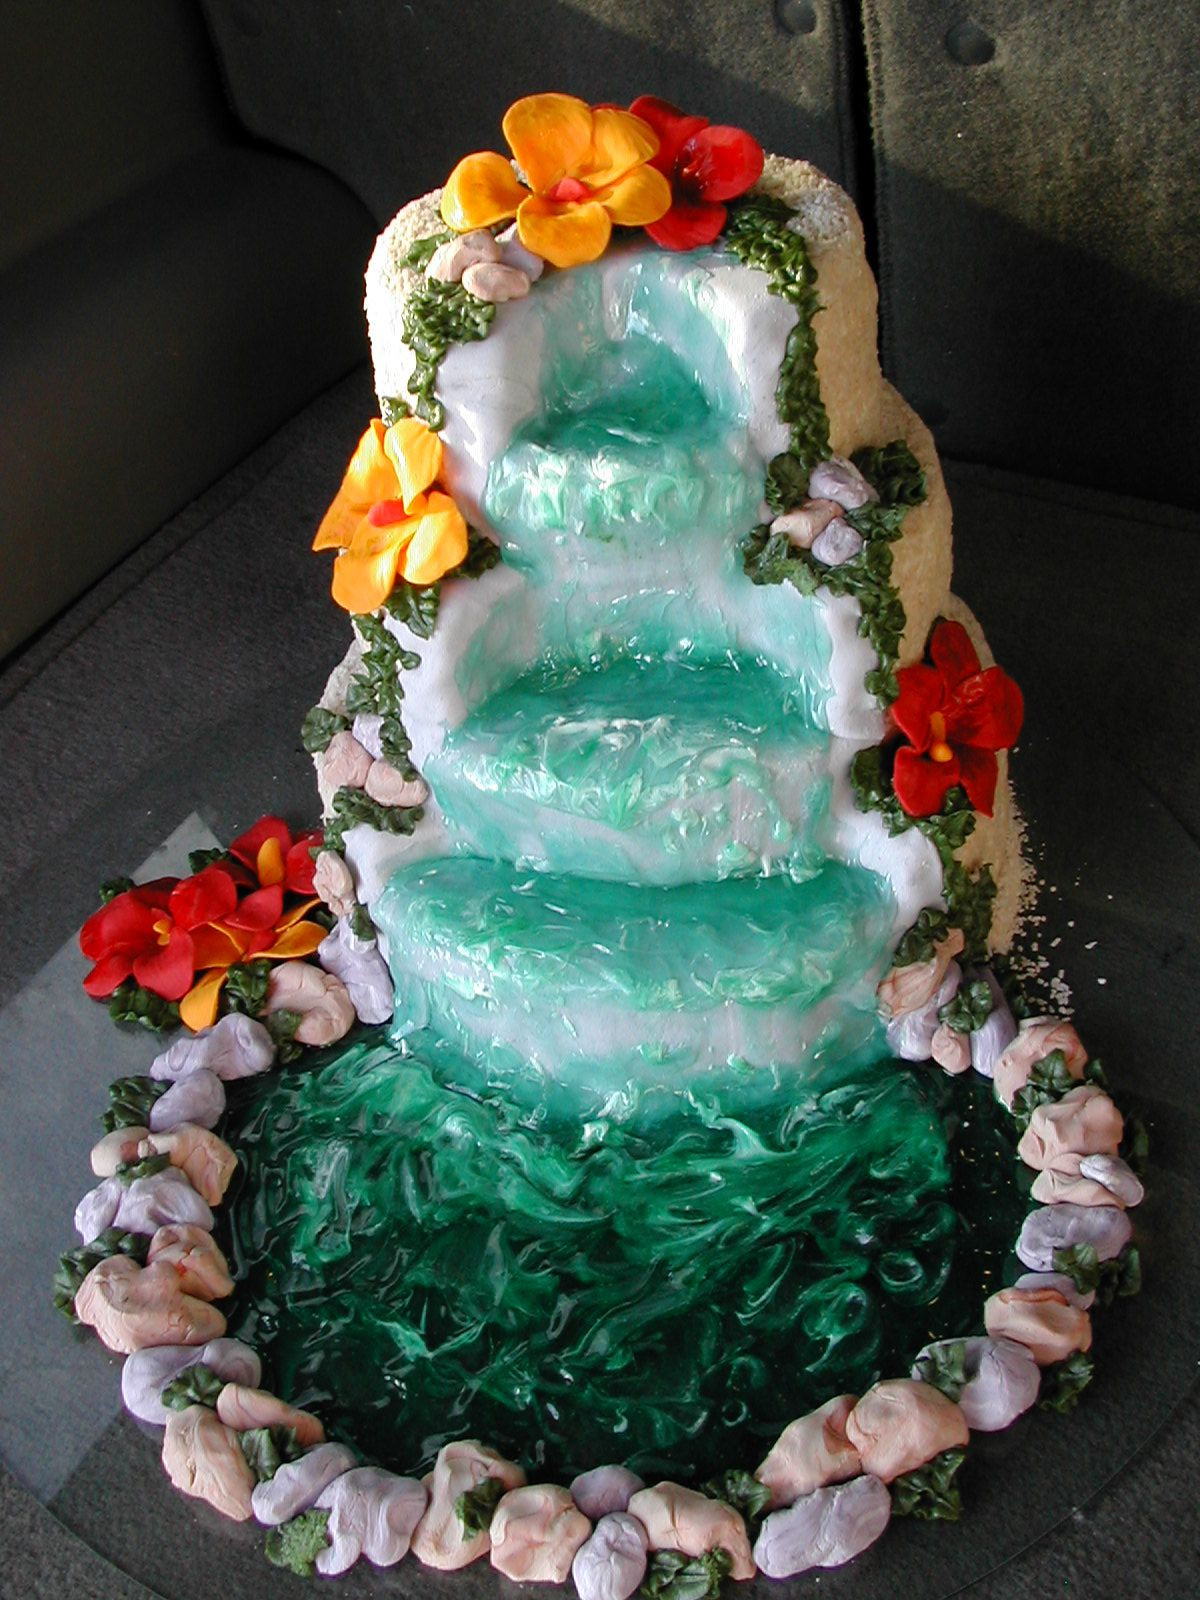 Wedding Cakes With Waterfalls
 Every tier is a waterfall It s a Coldplay cake